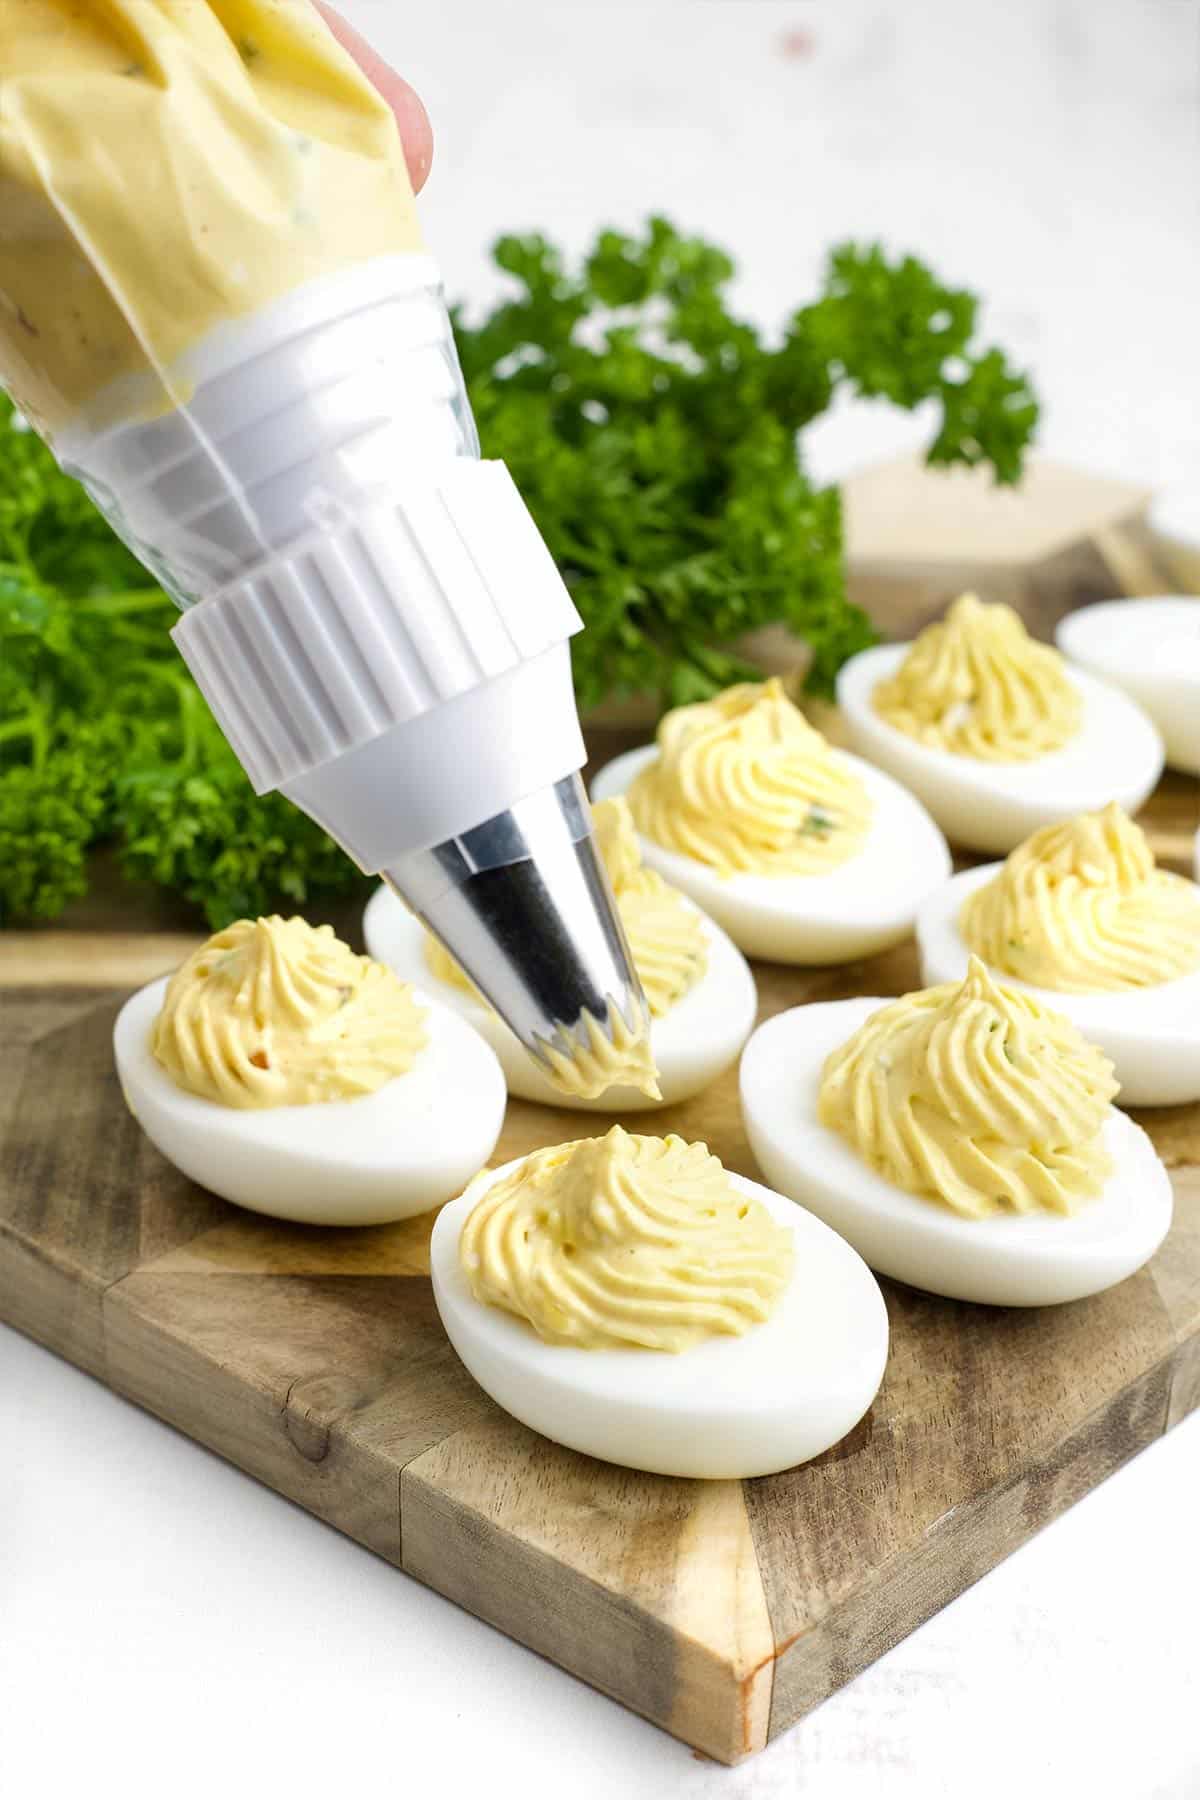 Piping the egg whites with the spicy egg filling.